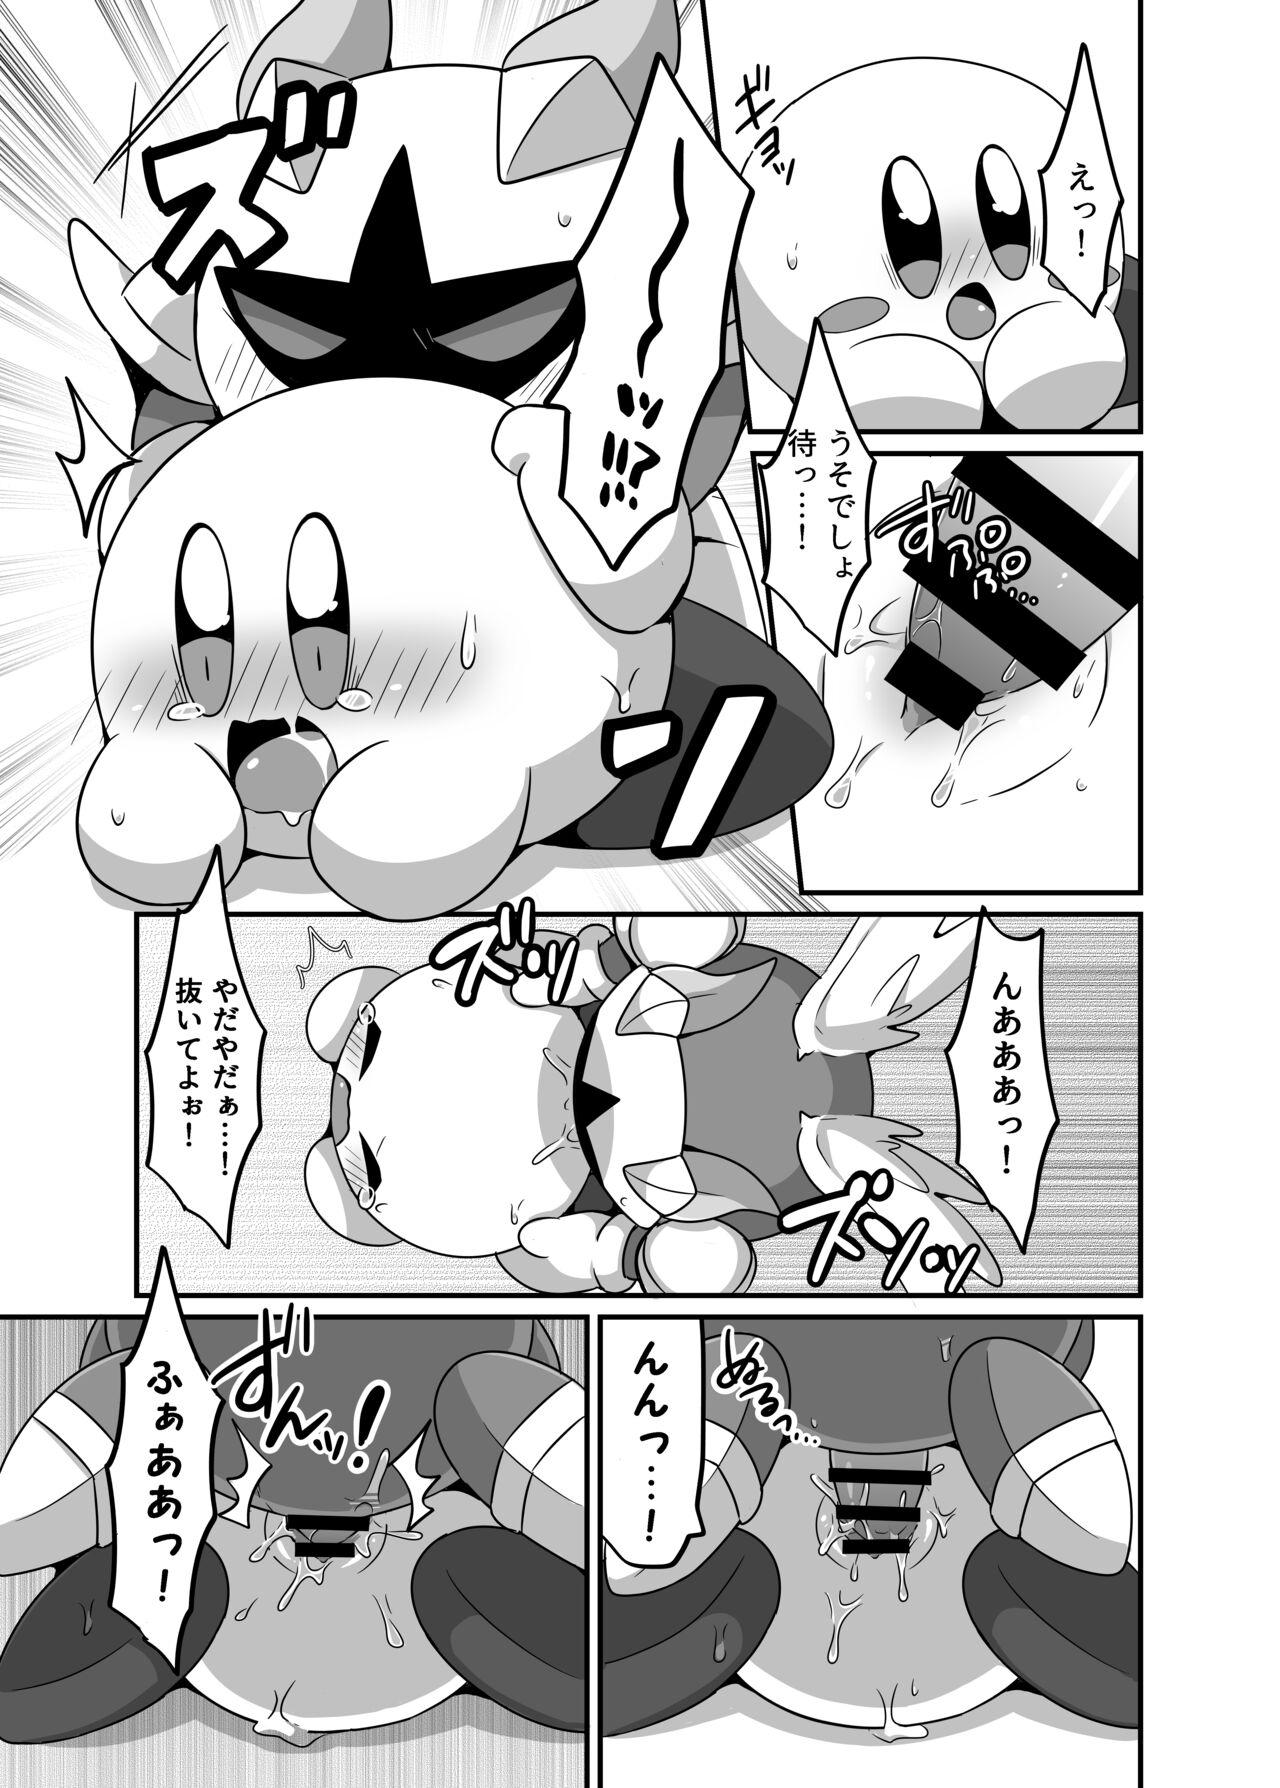 Spit I Want to Do XXX Even For Spheres! - Kirby Scissoring - Page 5